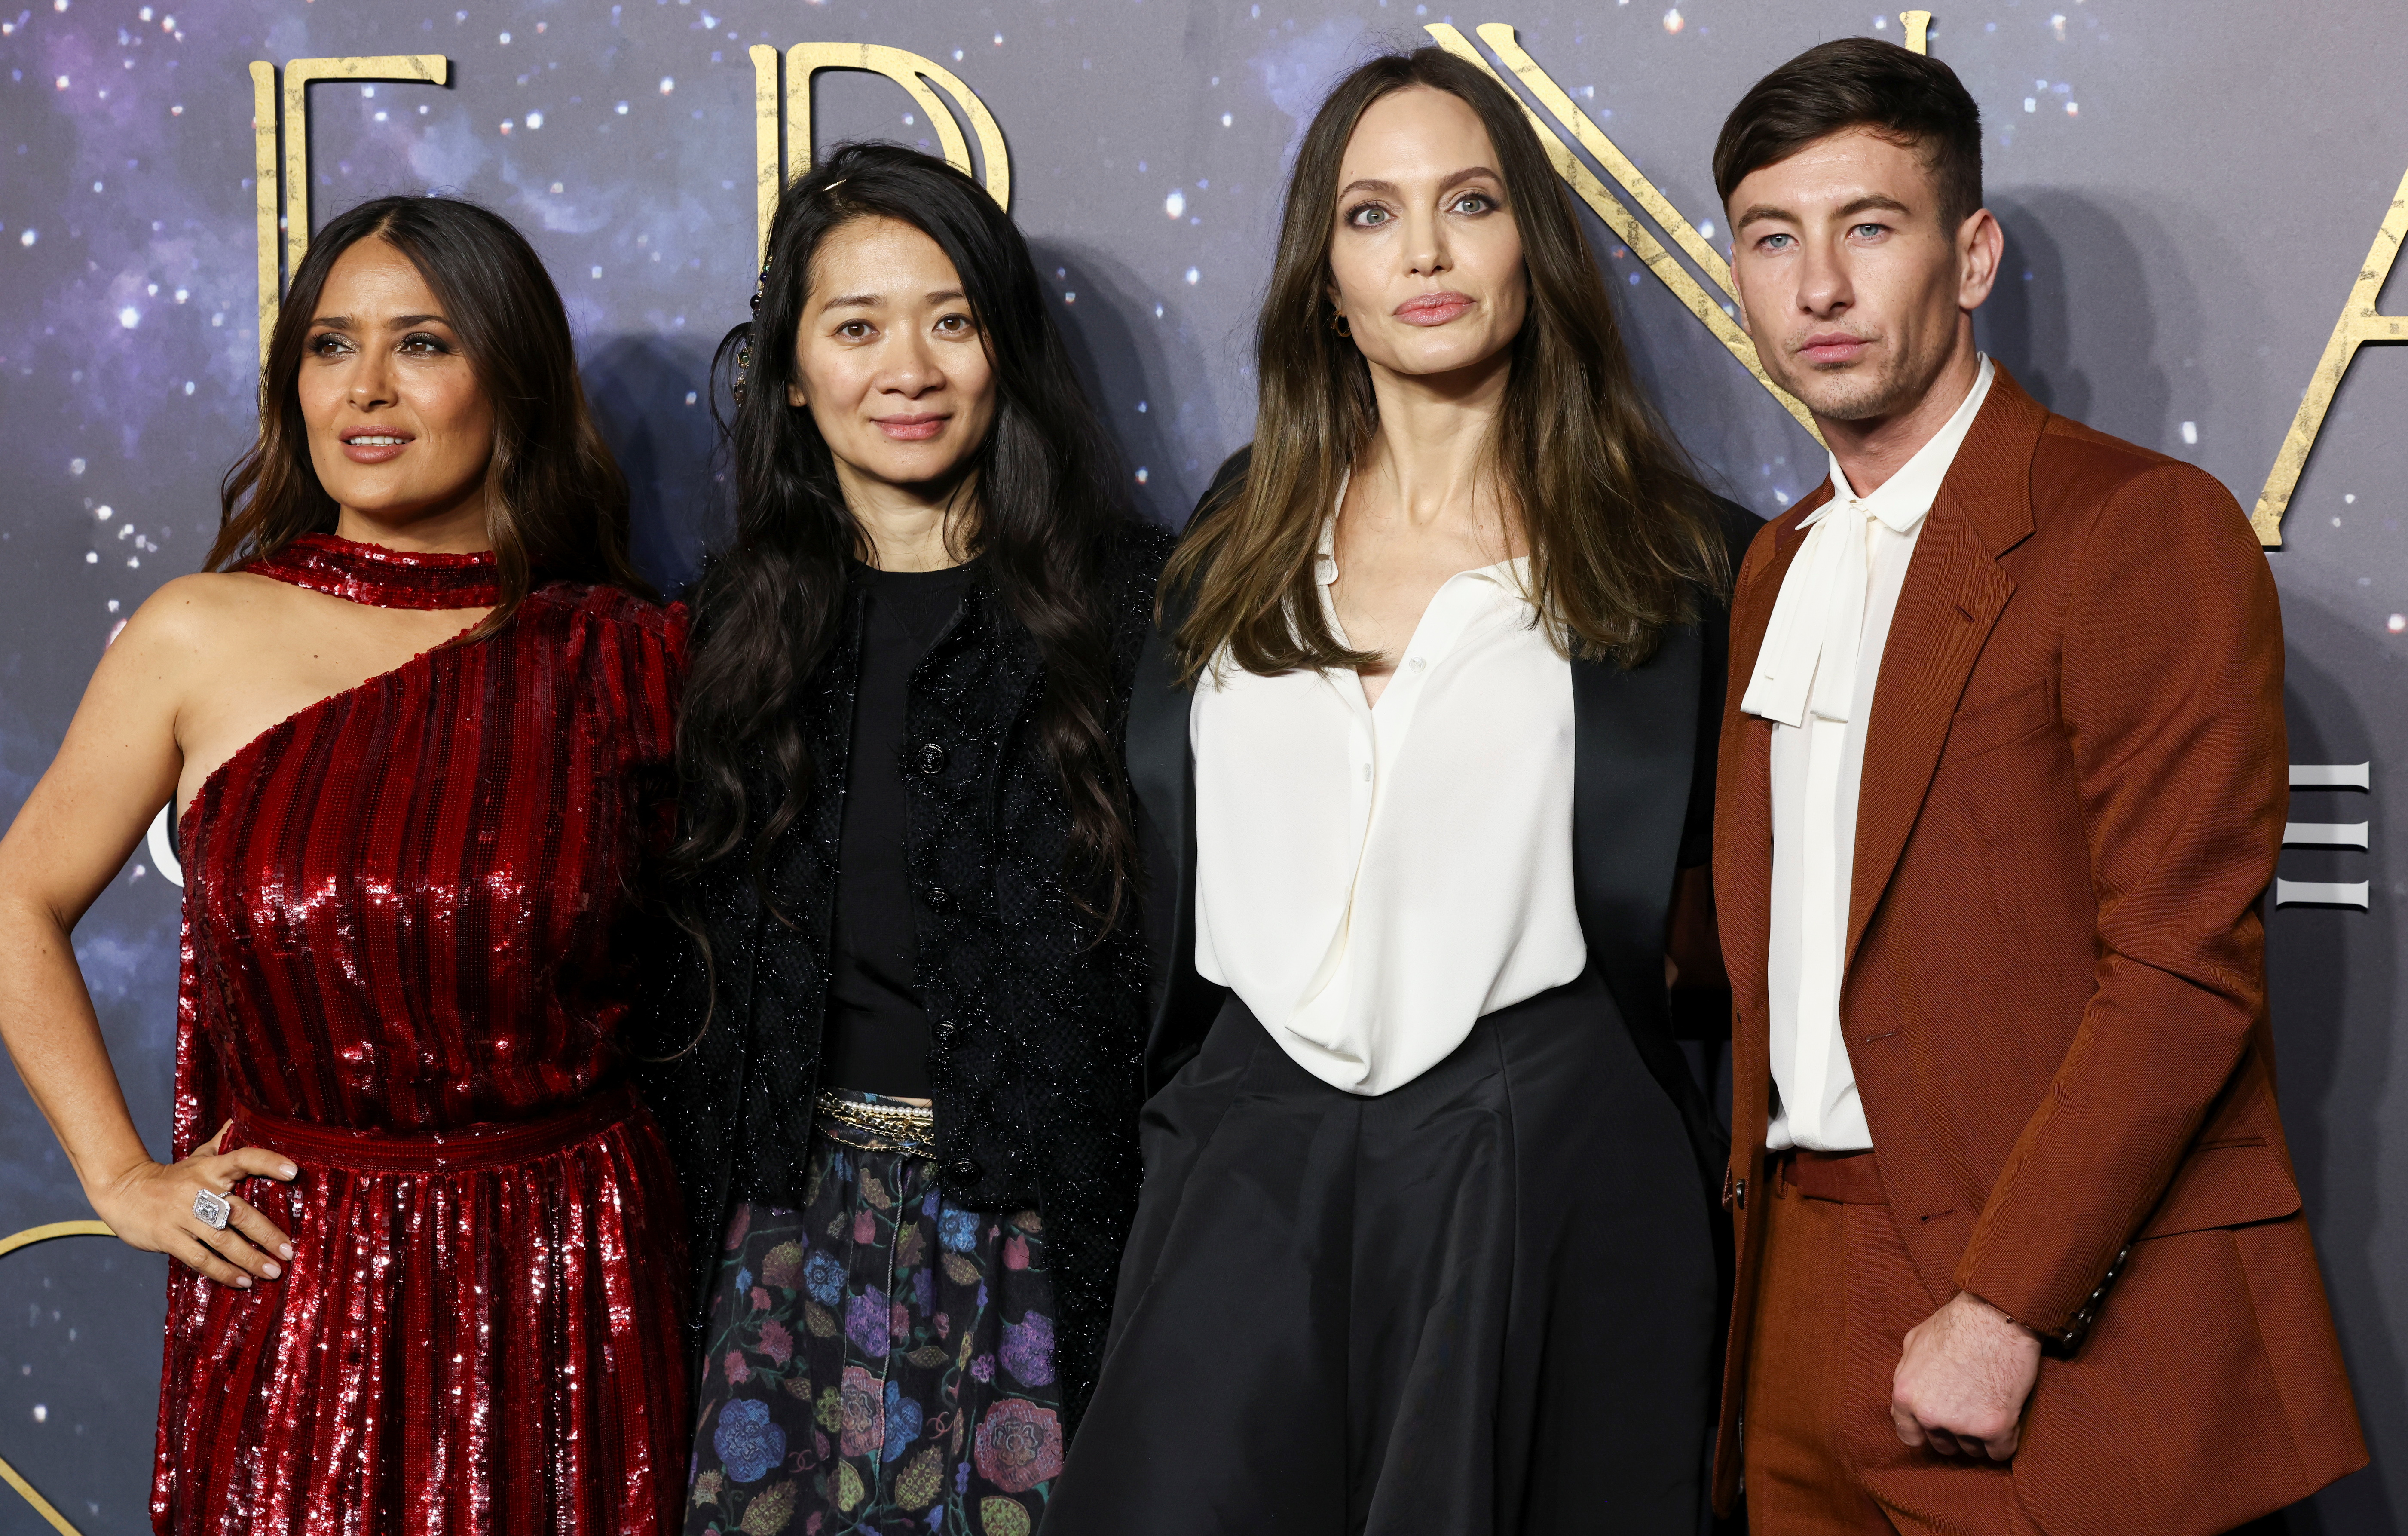 Director Chloe Zhao poses with cast members Salma Hayek, Angelina Jolie and Barry Keoghan as they arrive for a screening of the film "Eternals" in London, Britain, October 27, 2021. REUTERS/Henry Nicholls